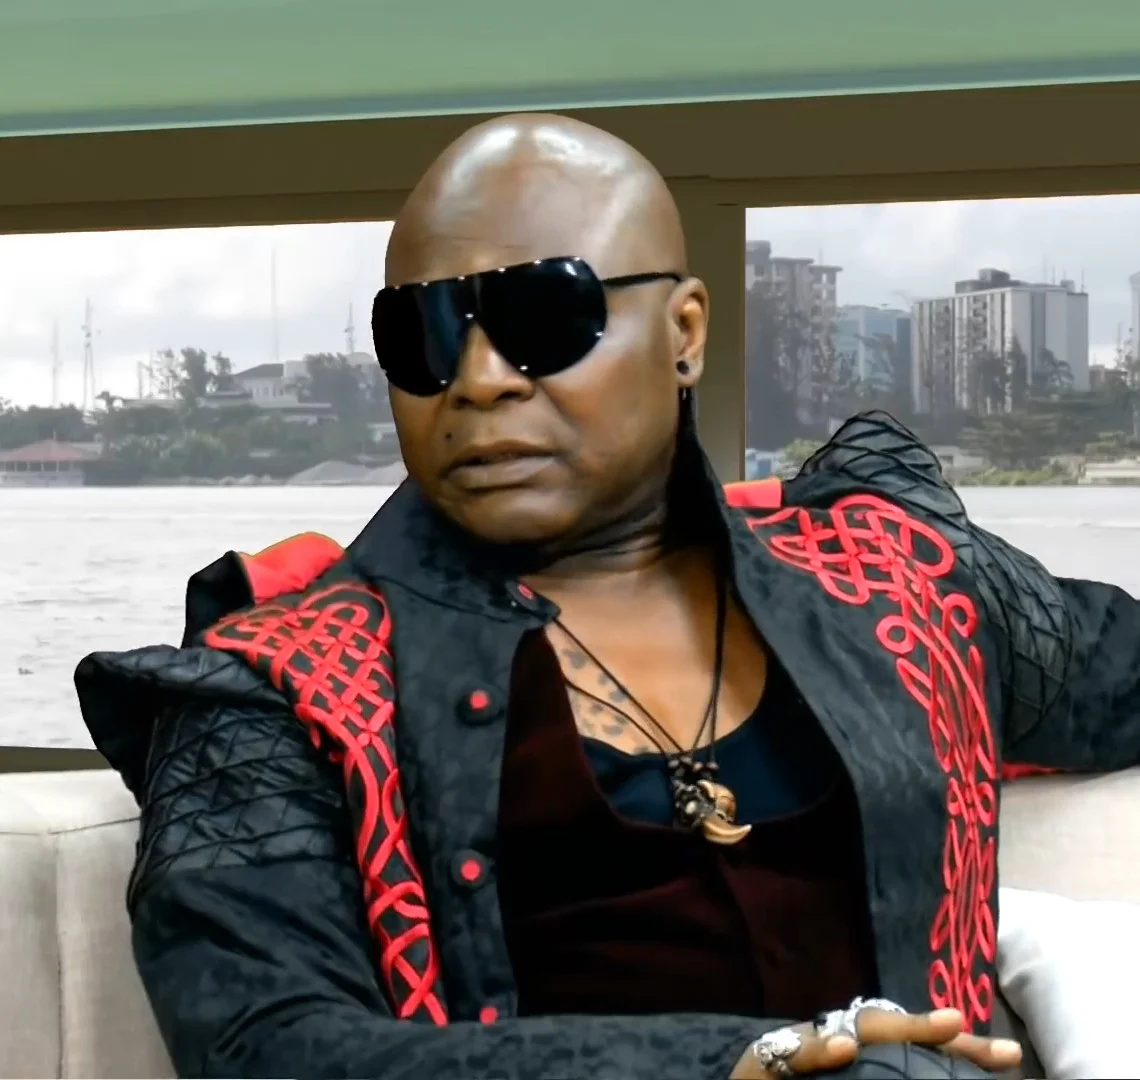 'Sometimes broken marriages produce strongest individuals' - Charly Boy reacts to AY's marital crisis